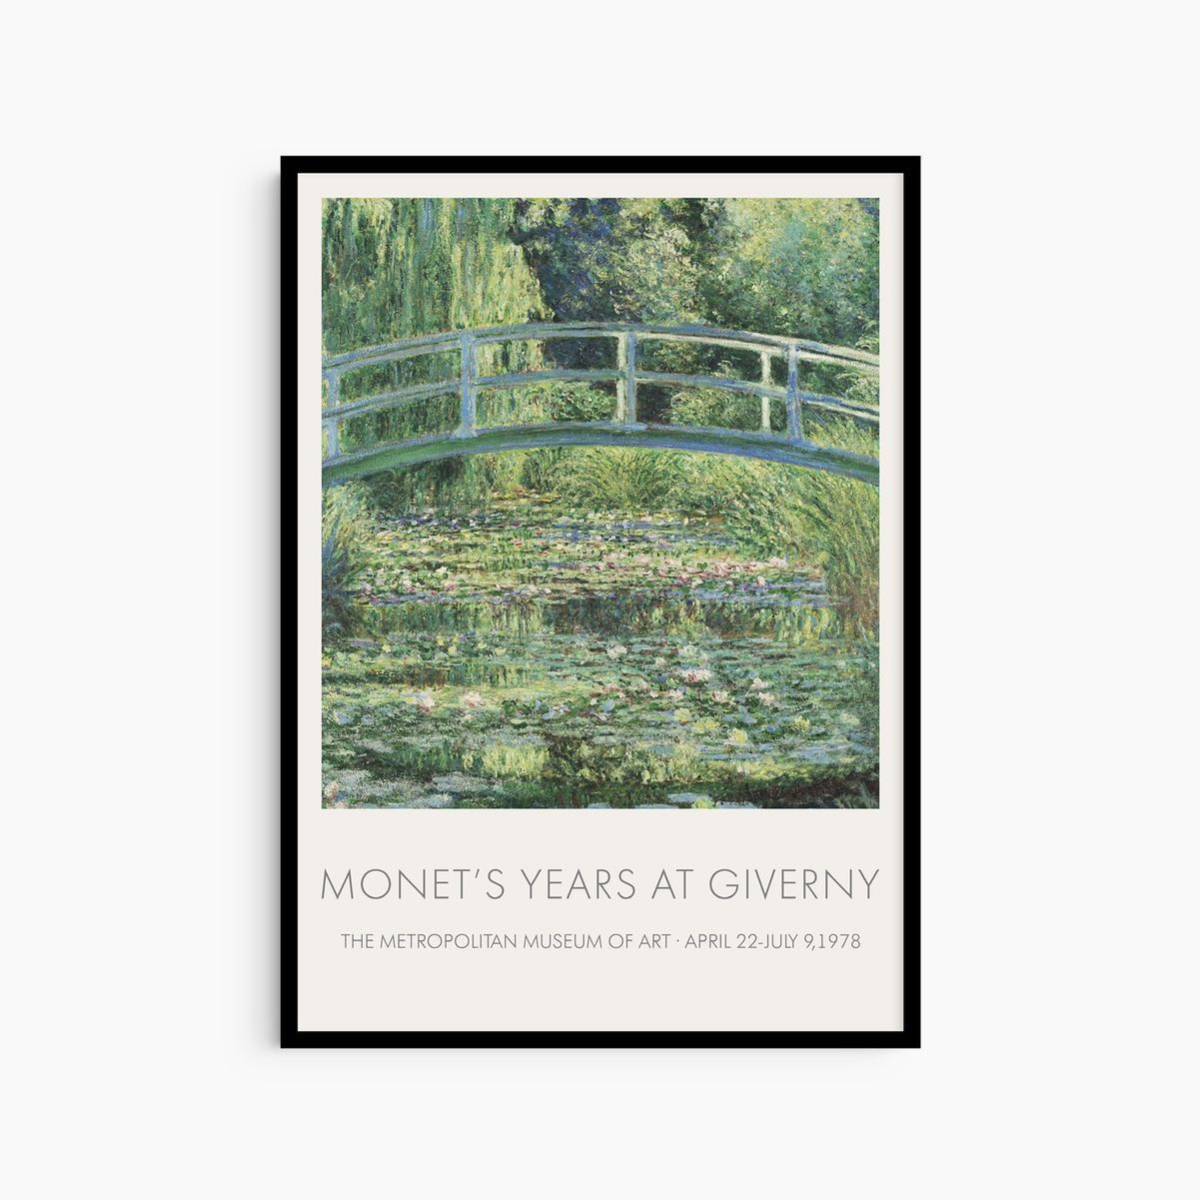 Modern art posters, mid-century modern, contemporary art, pop art, Monet, nature, oil paintings, interior design, illustrations, paintings, foreign posters, art, A4, Printed materials, Poster, others